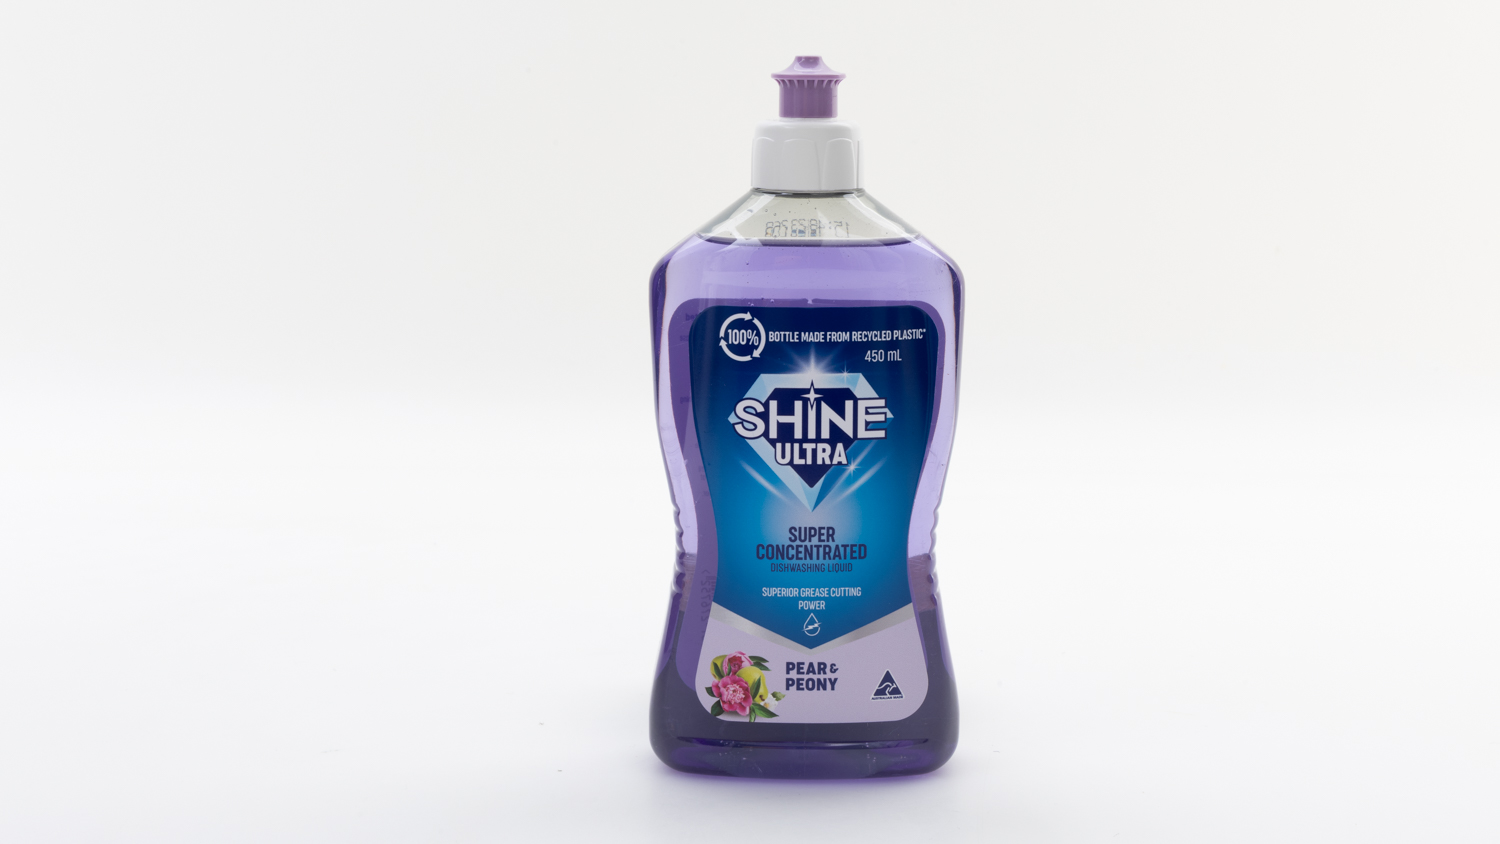 Woolworths Shine Ultra Super Concentrated Dishwashing Liquid carousel image